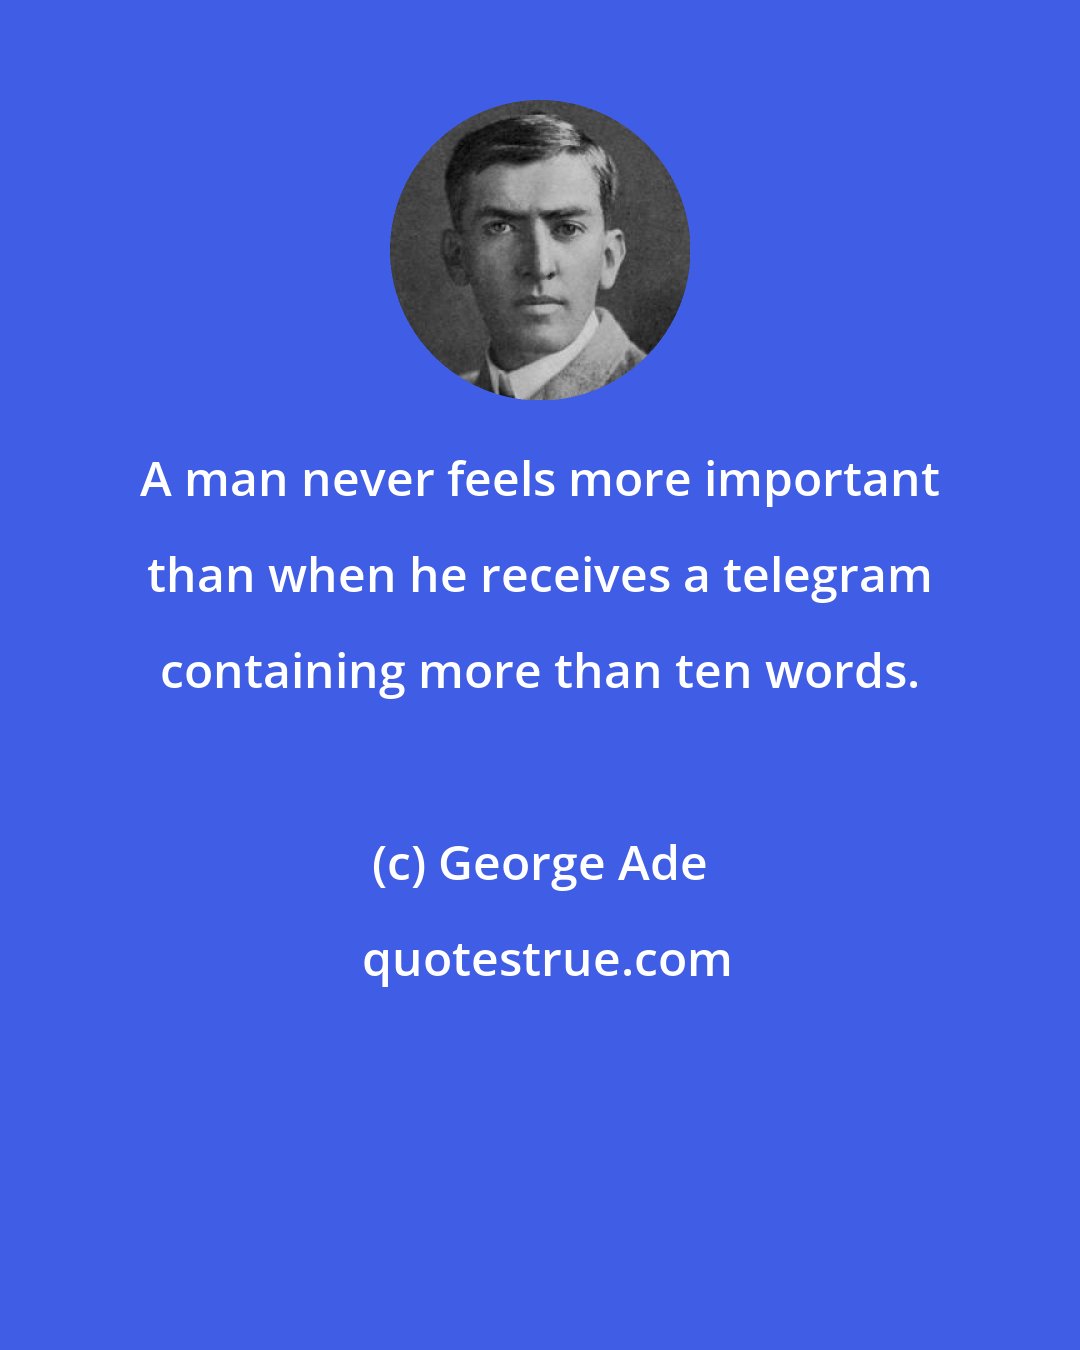 George Ade: A man never feels more important than when he receives a telegram containing more than ten words.